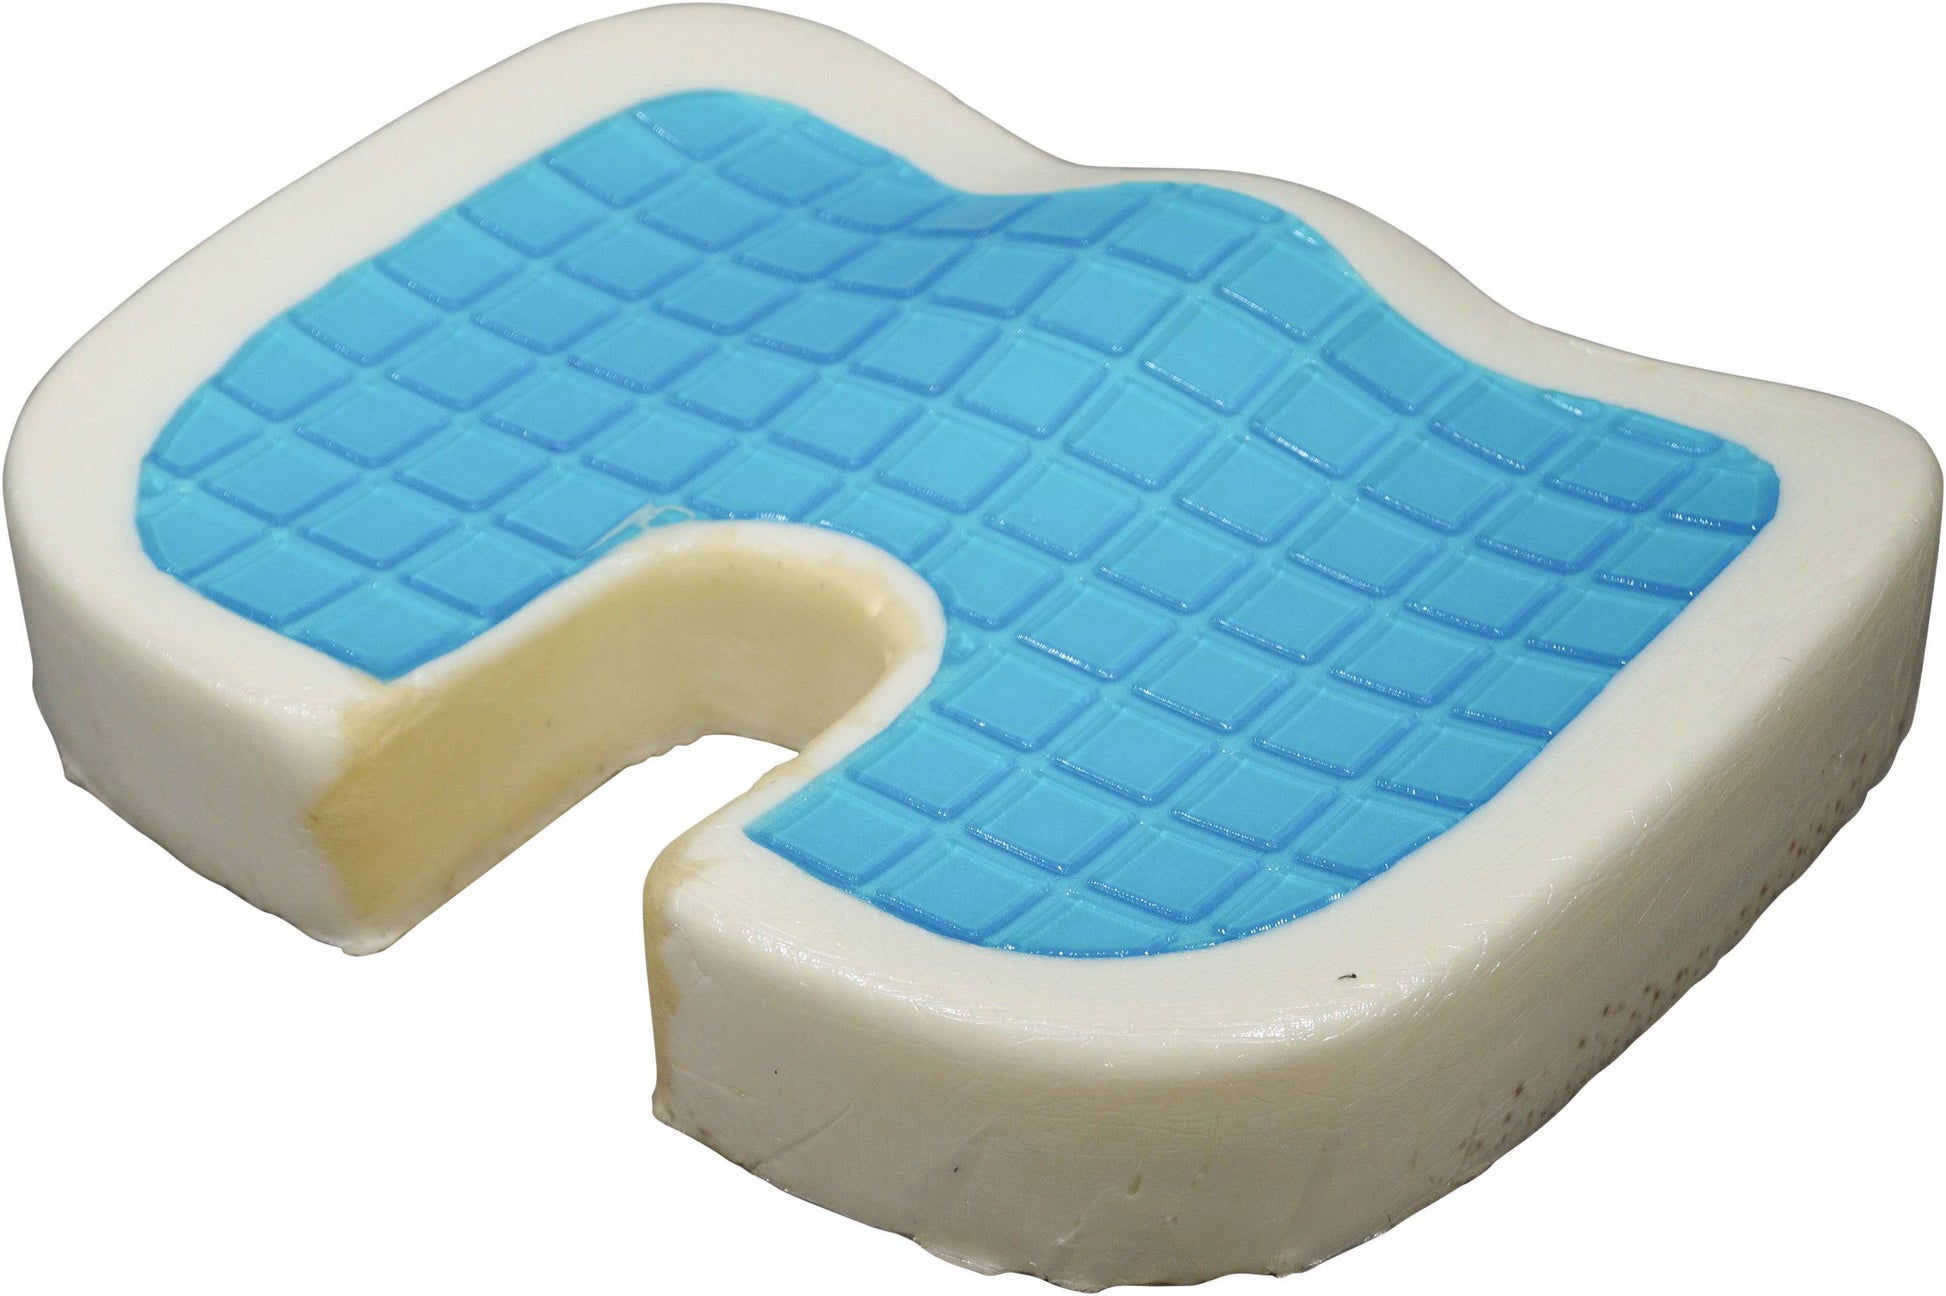 Aidapt Deluxe Pressure Relief Coccyx Cushion with Gel